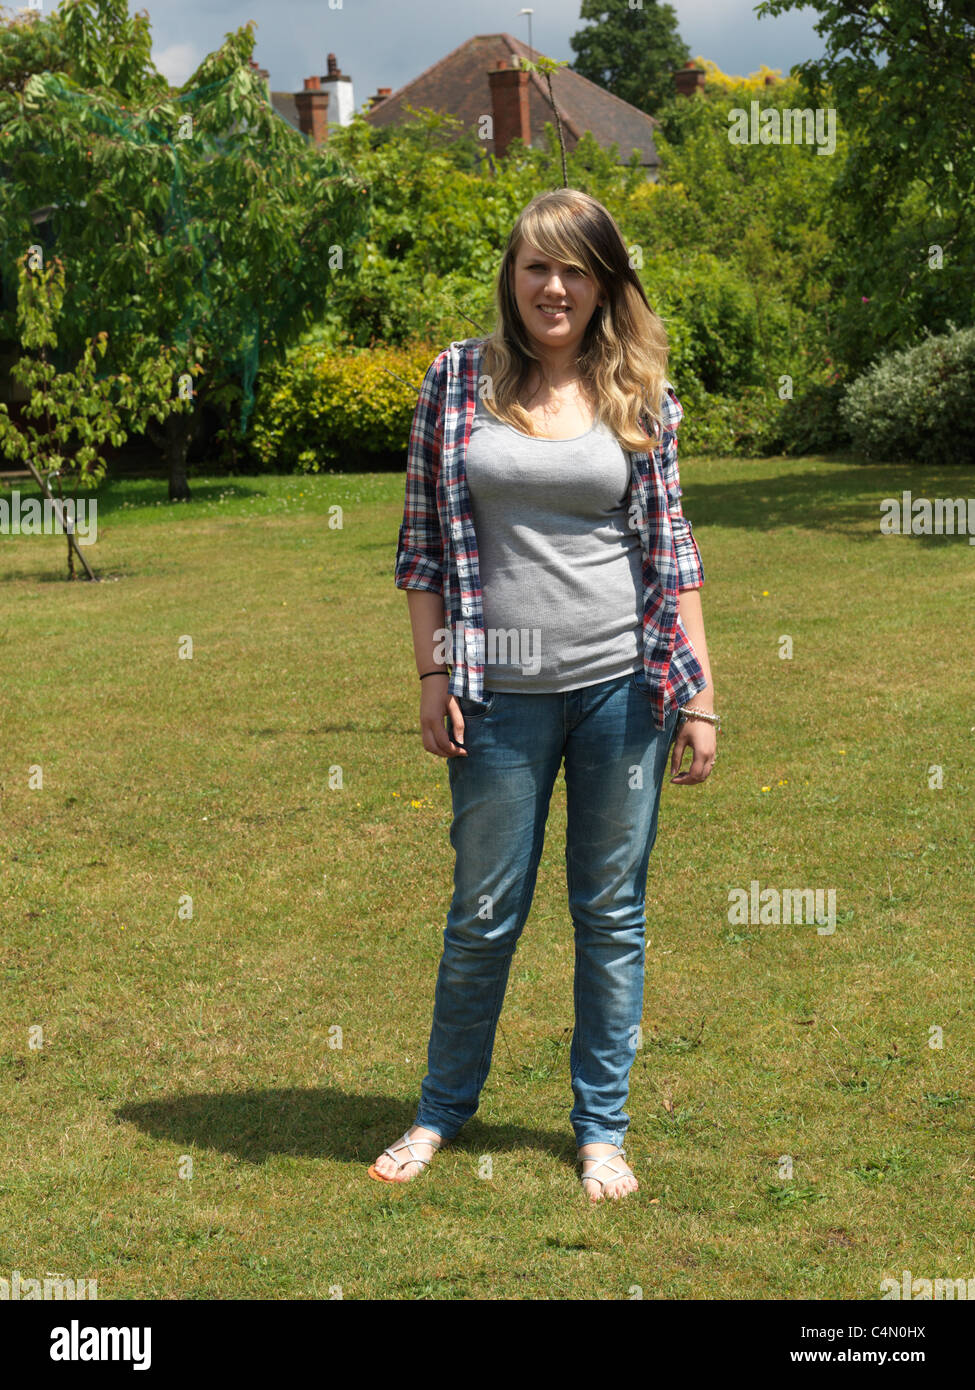 Young Woman Out In The Garden Wearing Shirt, Jeans And Sandals Stock Photo